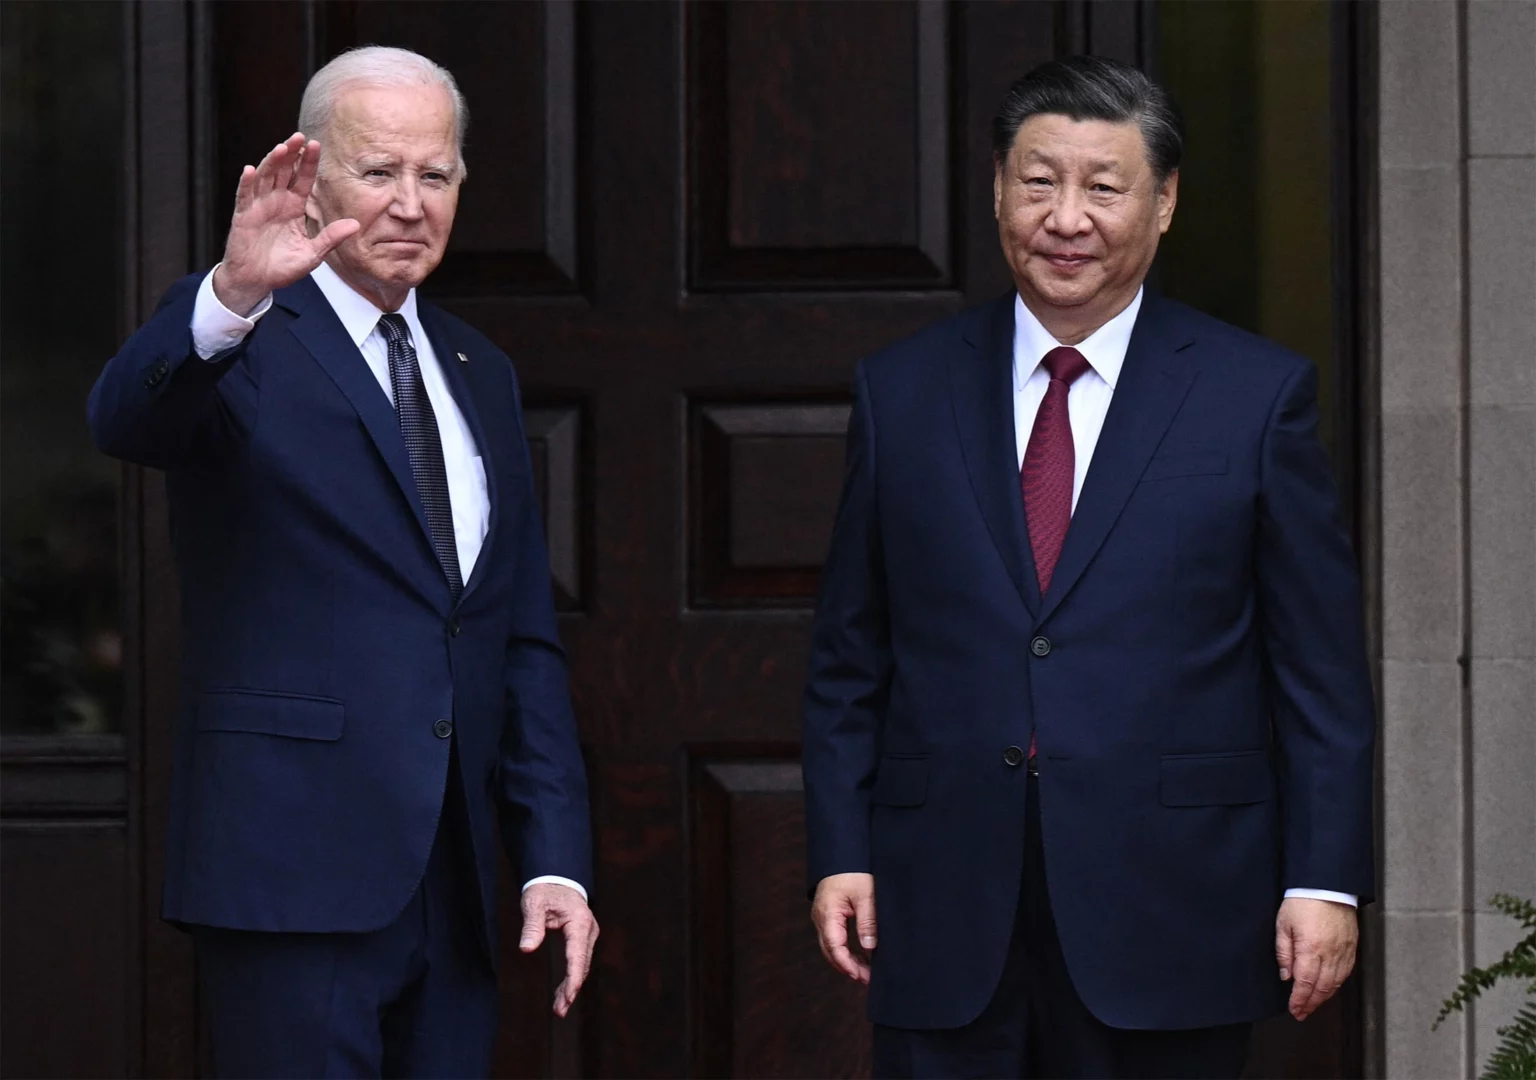 joe-biden-hails-progress-of-meeting-with-xi-jinping-but-the-fate-of-taiwan-and-us-nationals-imprisoned-remain-in-the-hang-in-balance